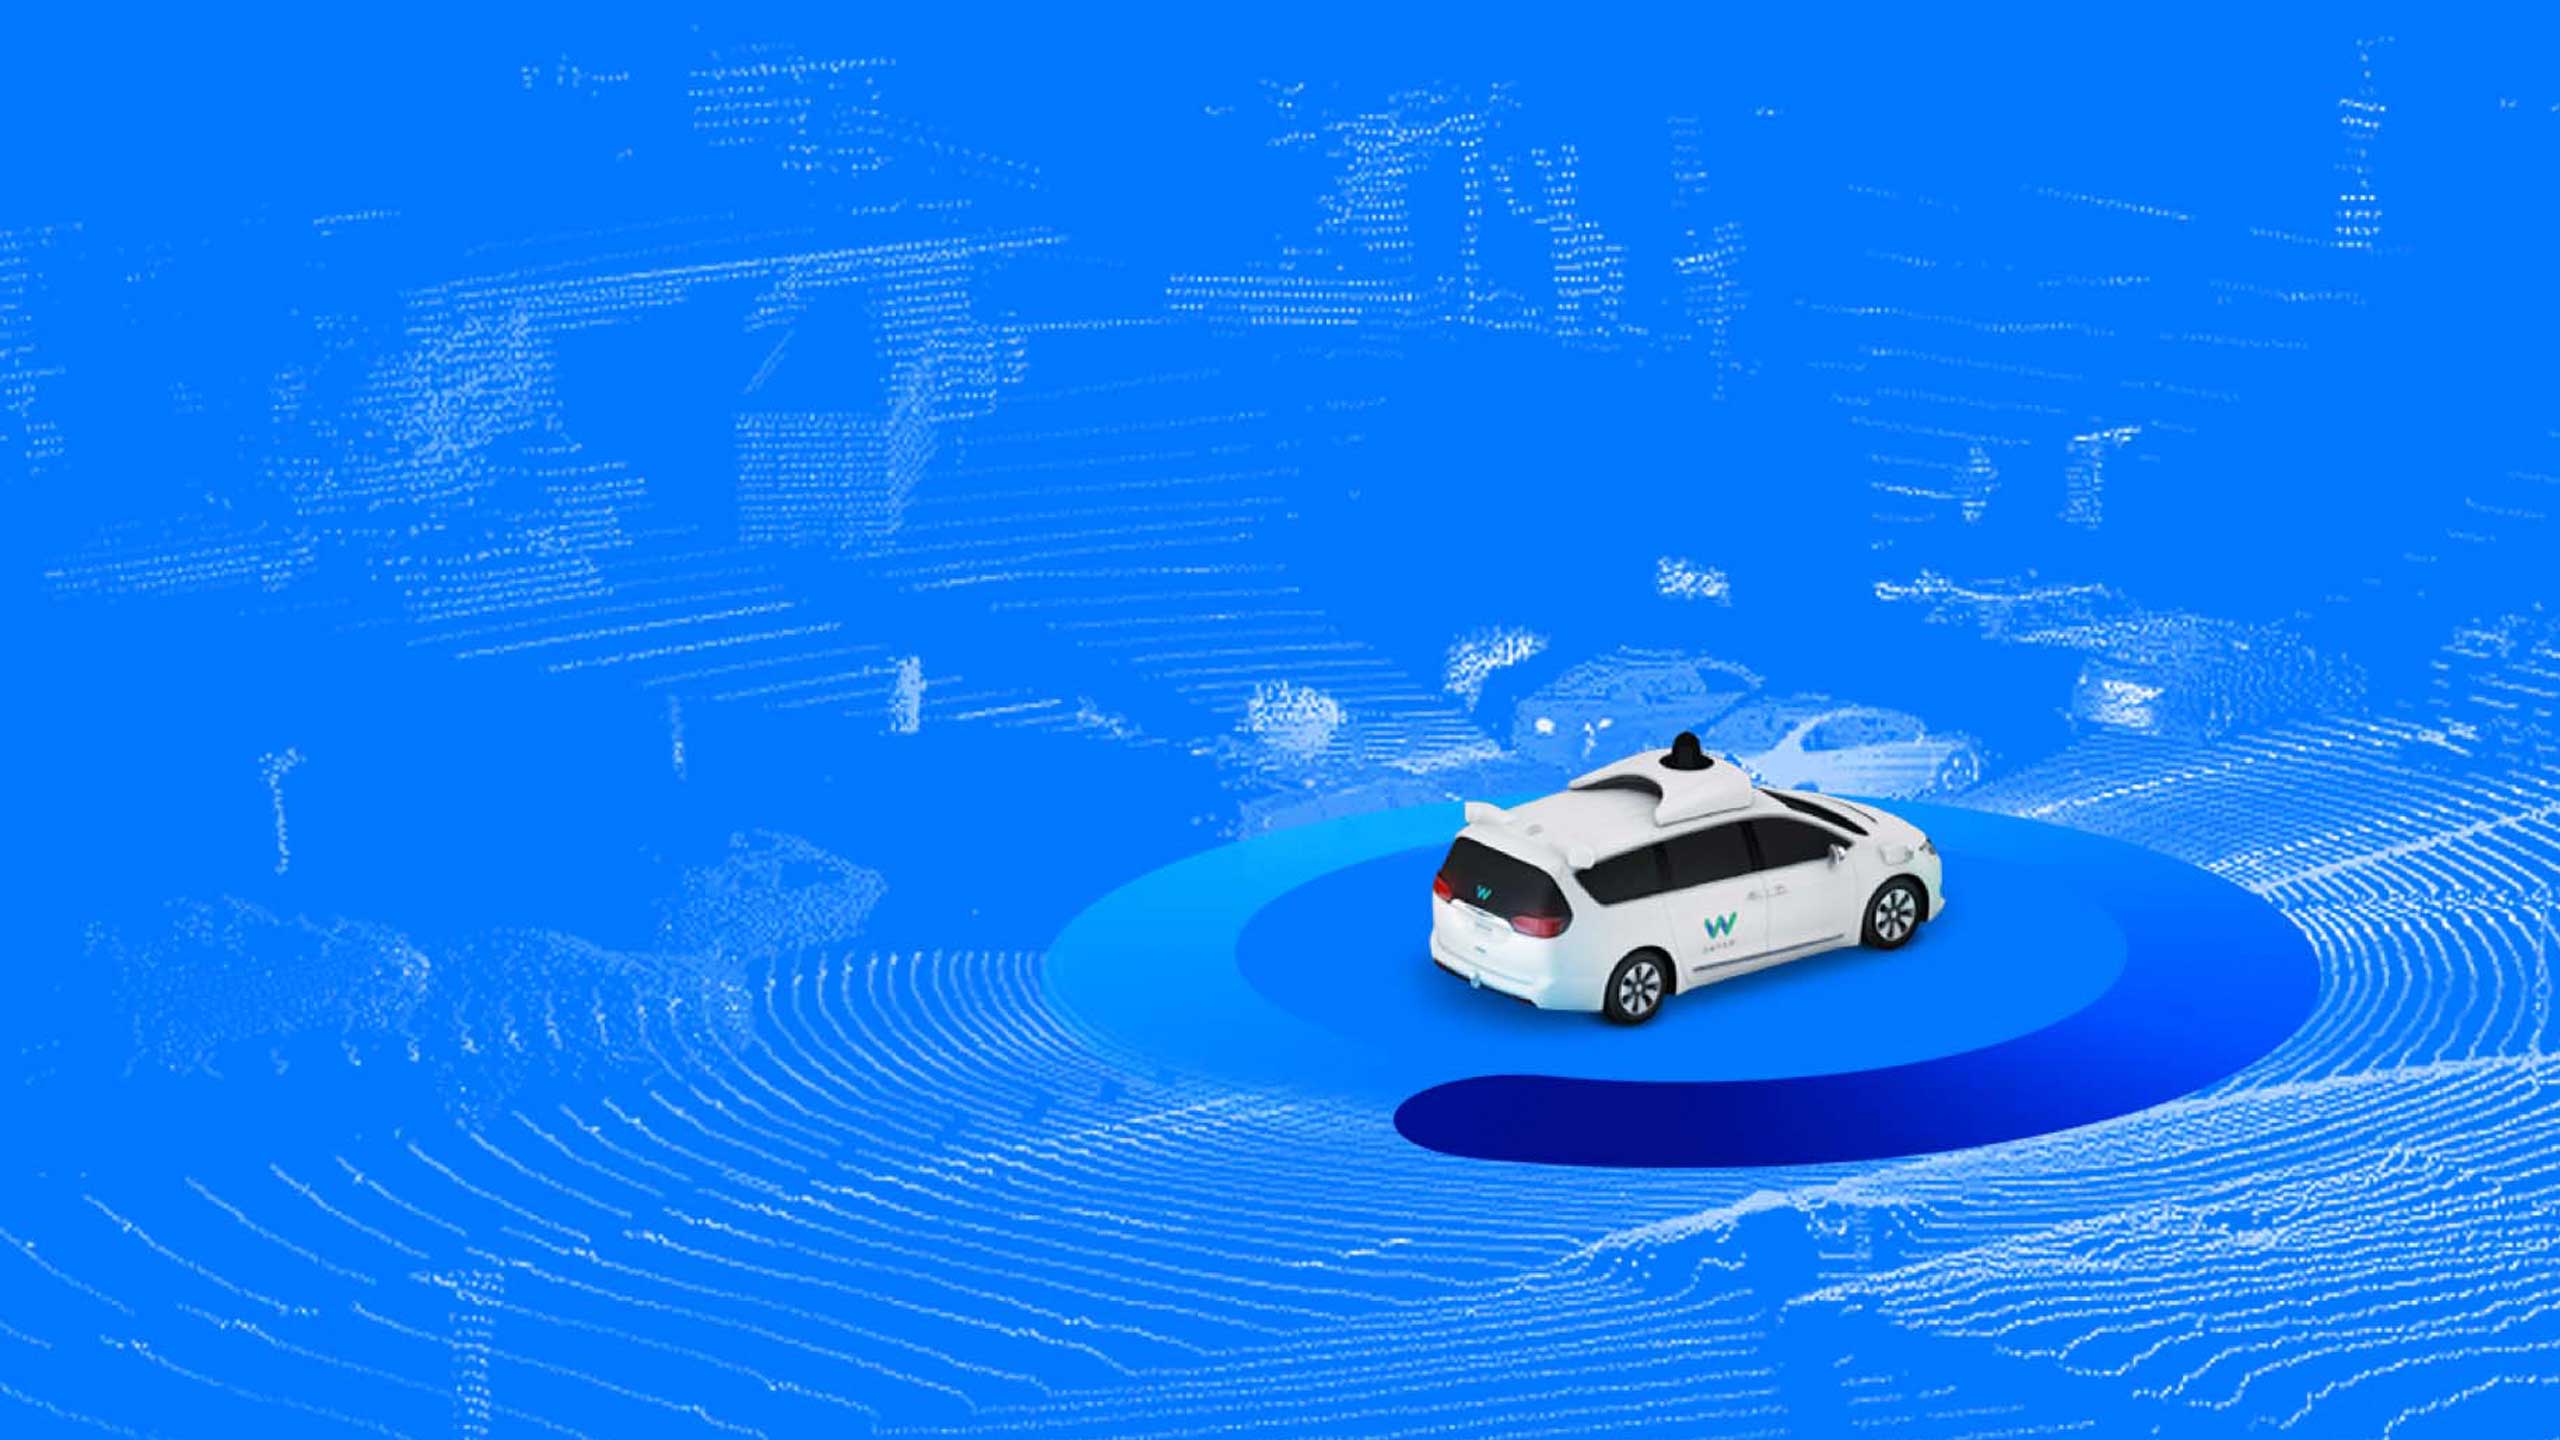 A self-driving car with a Waymo logo is shown on a field of blue, with sketchy white lines filling in the street scene around it